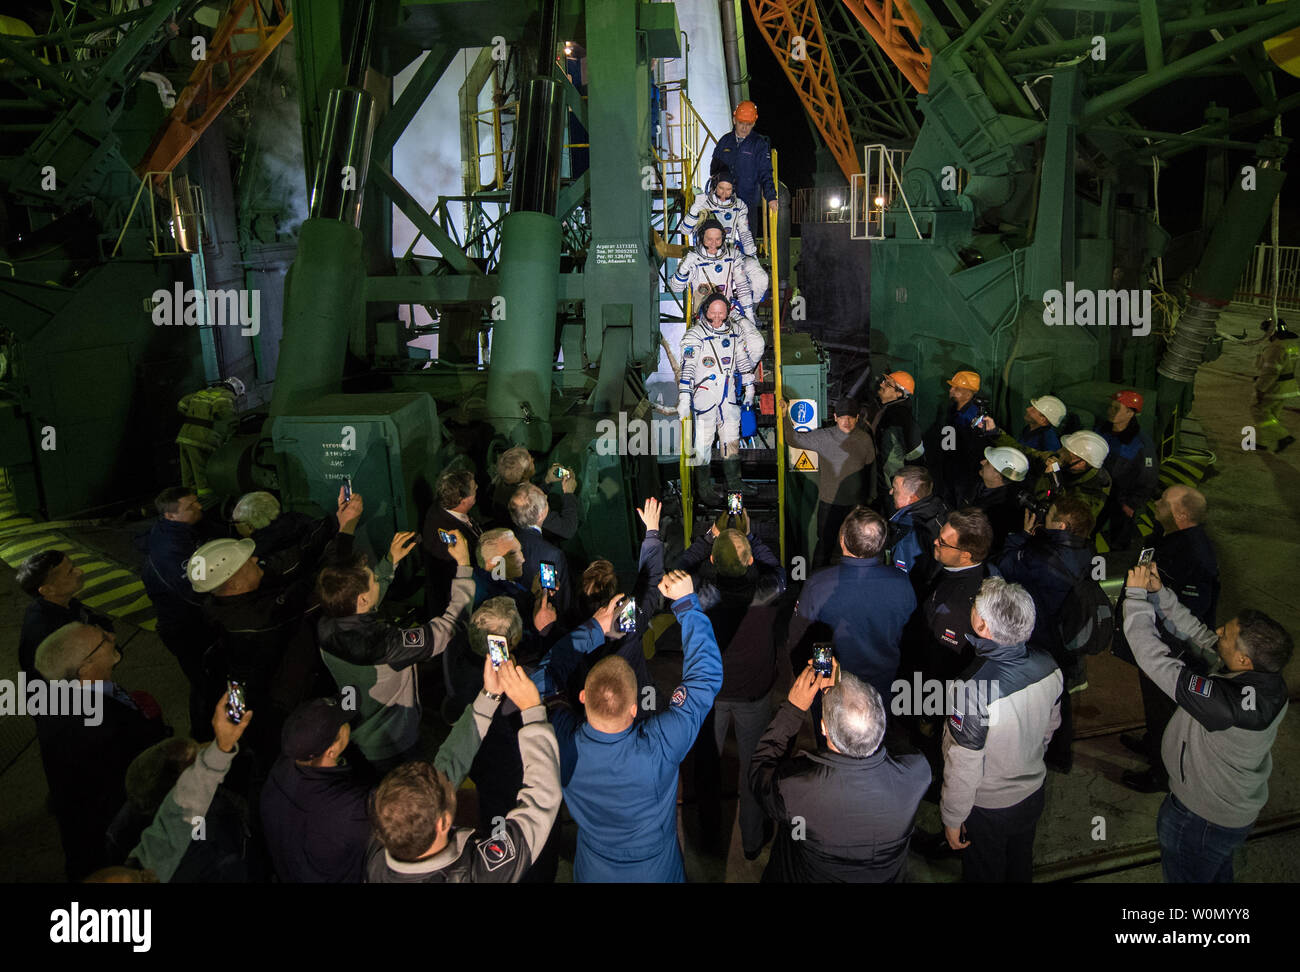 Expedition 55 flight engineer Drew Feustel of NASA, top, flight engineer Ricky Arnold of NASA, middle, and Soyuz Commander Oleg Artemyev of Roscosmos, bottom, wave farewell prior to boarding the Soyuz MS-08 spacecraft for launch, on March 21, 2018, at the Baikonur Cosmodrome in Kazakhstan. Feustel, Arnold, and Artemyev will spend the next five months living and working aboard the International Space Station. NASA Photo by Joel Kowsky/UPI Stock Photo